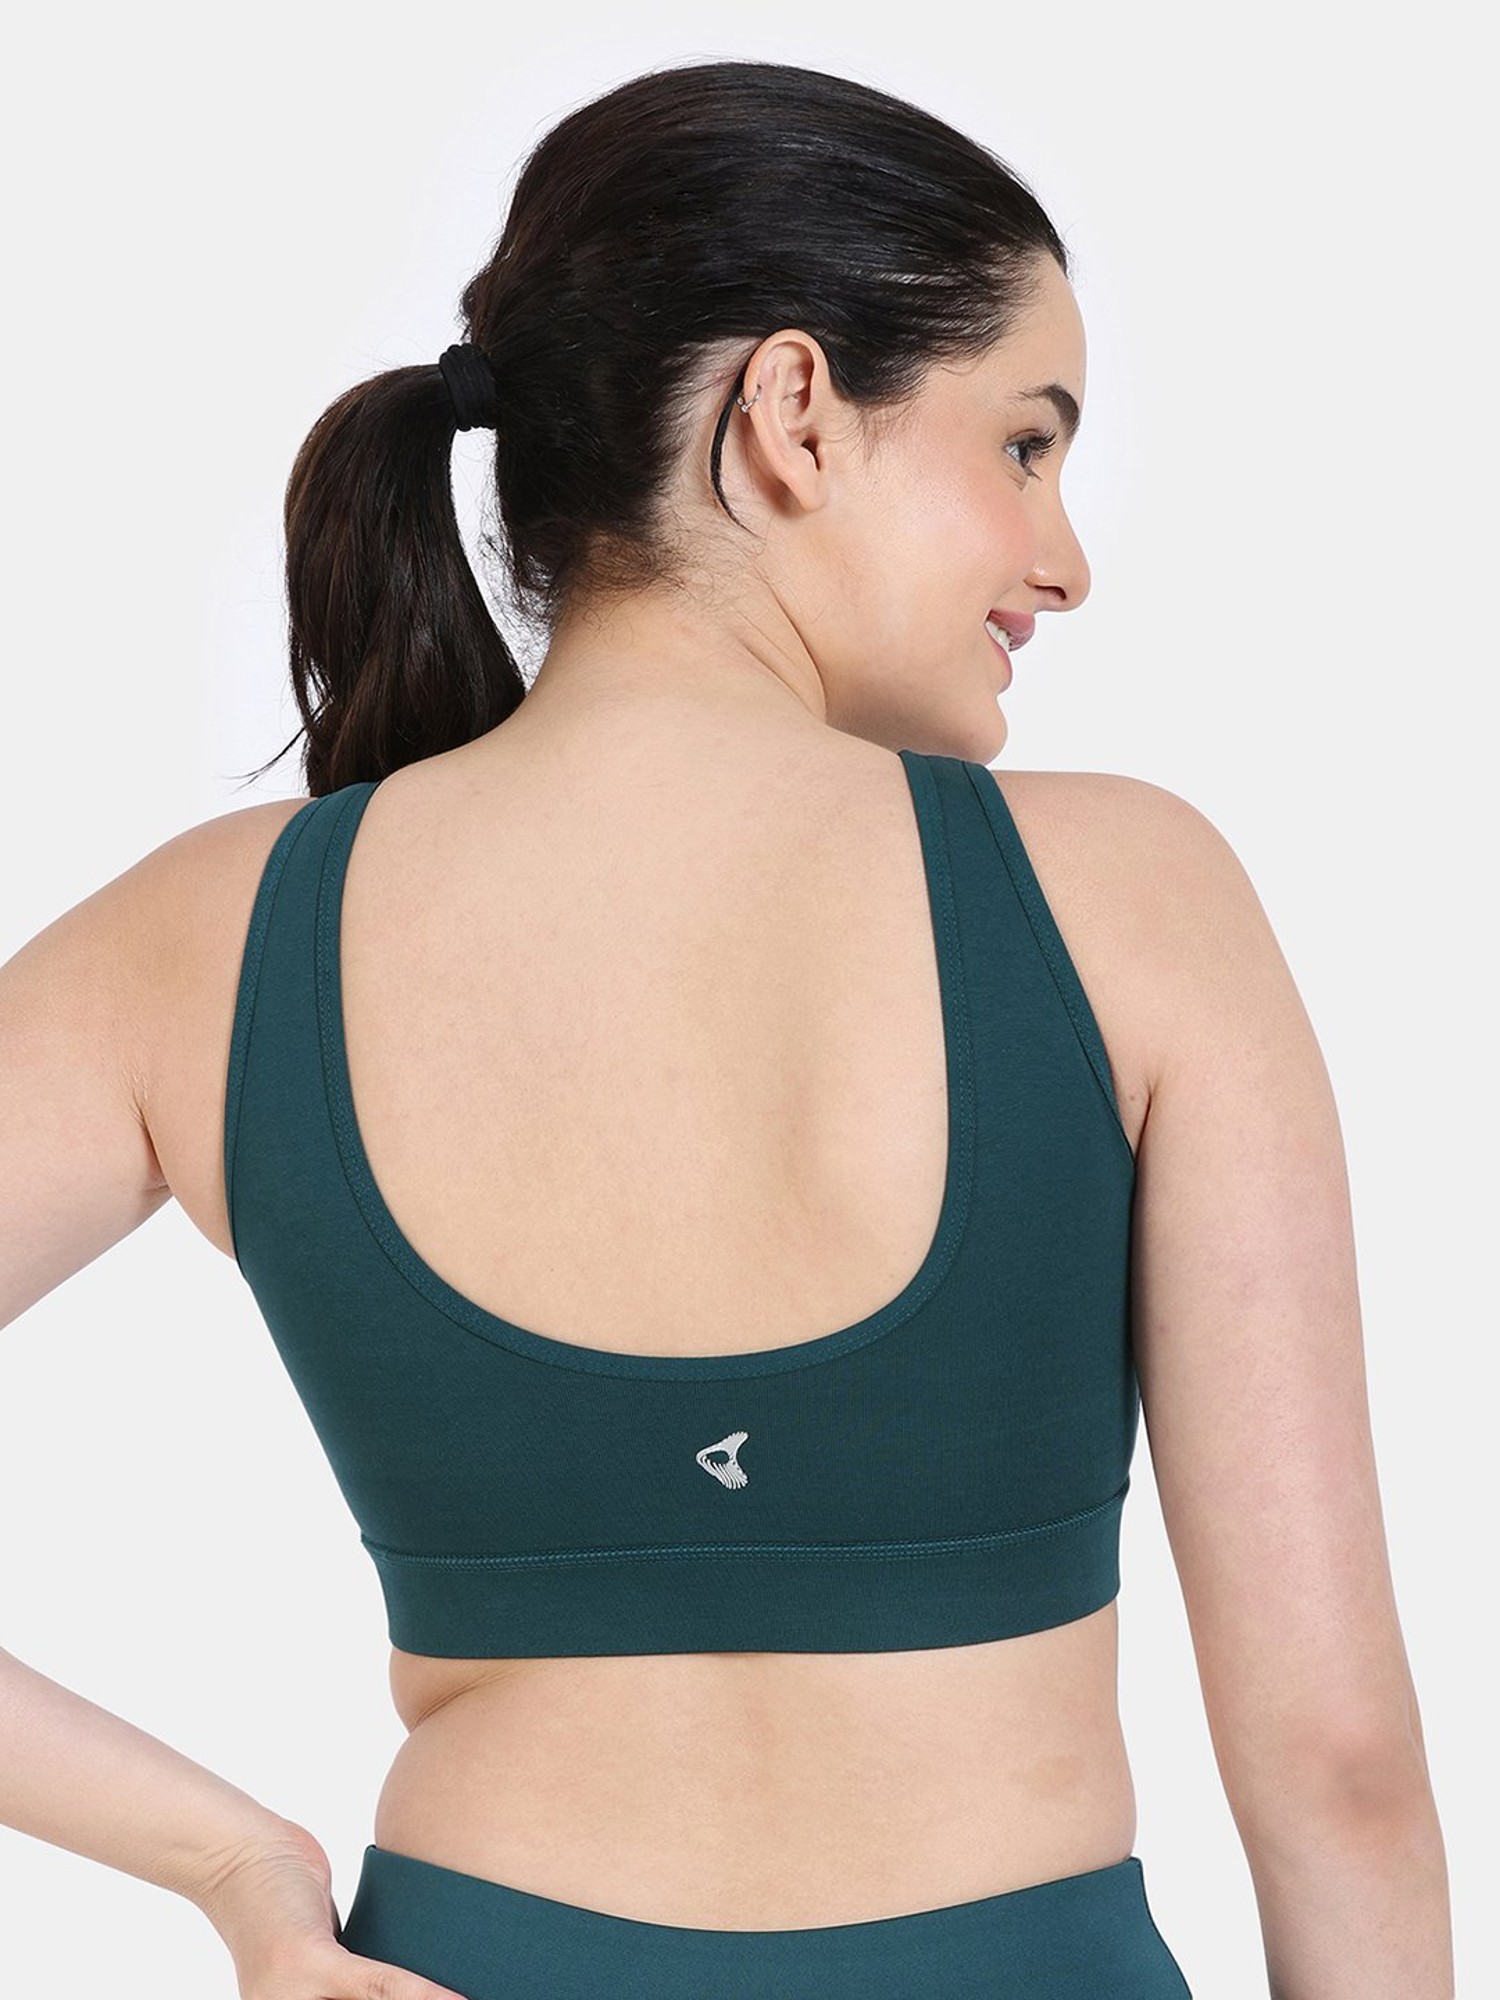 Zelocity Padded Sports Bra With Removable Padding - Teal Blue